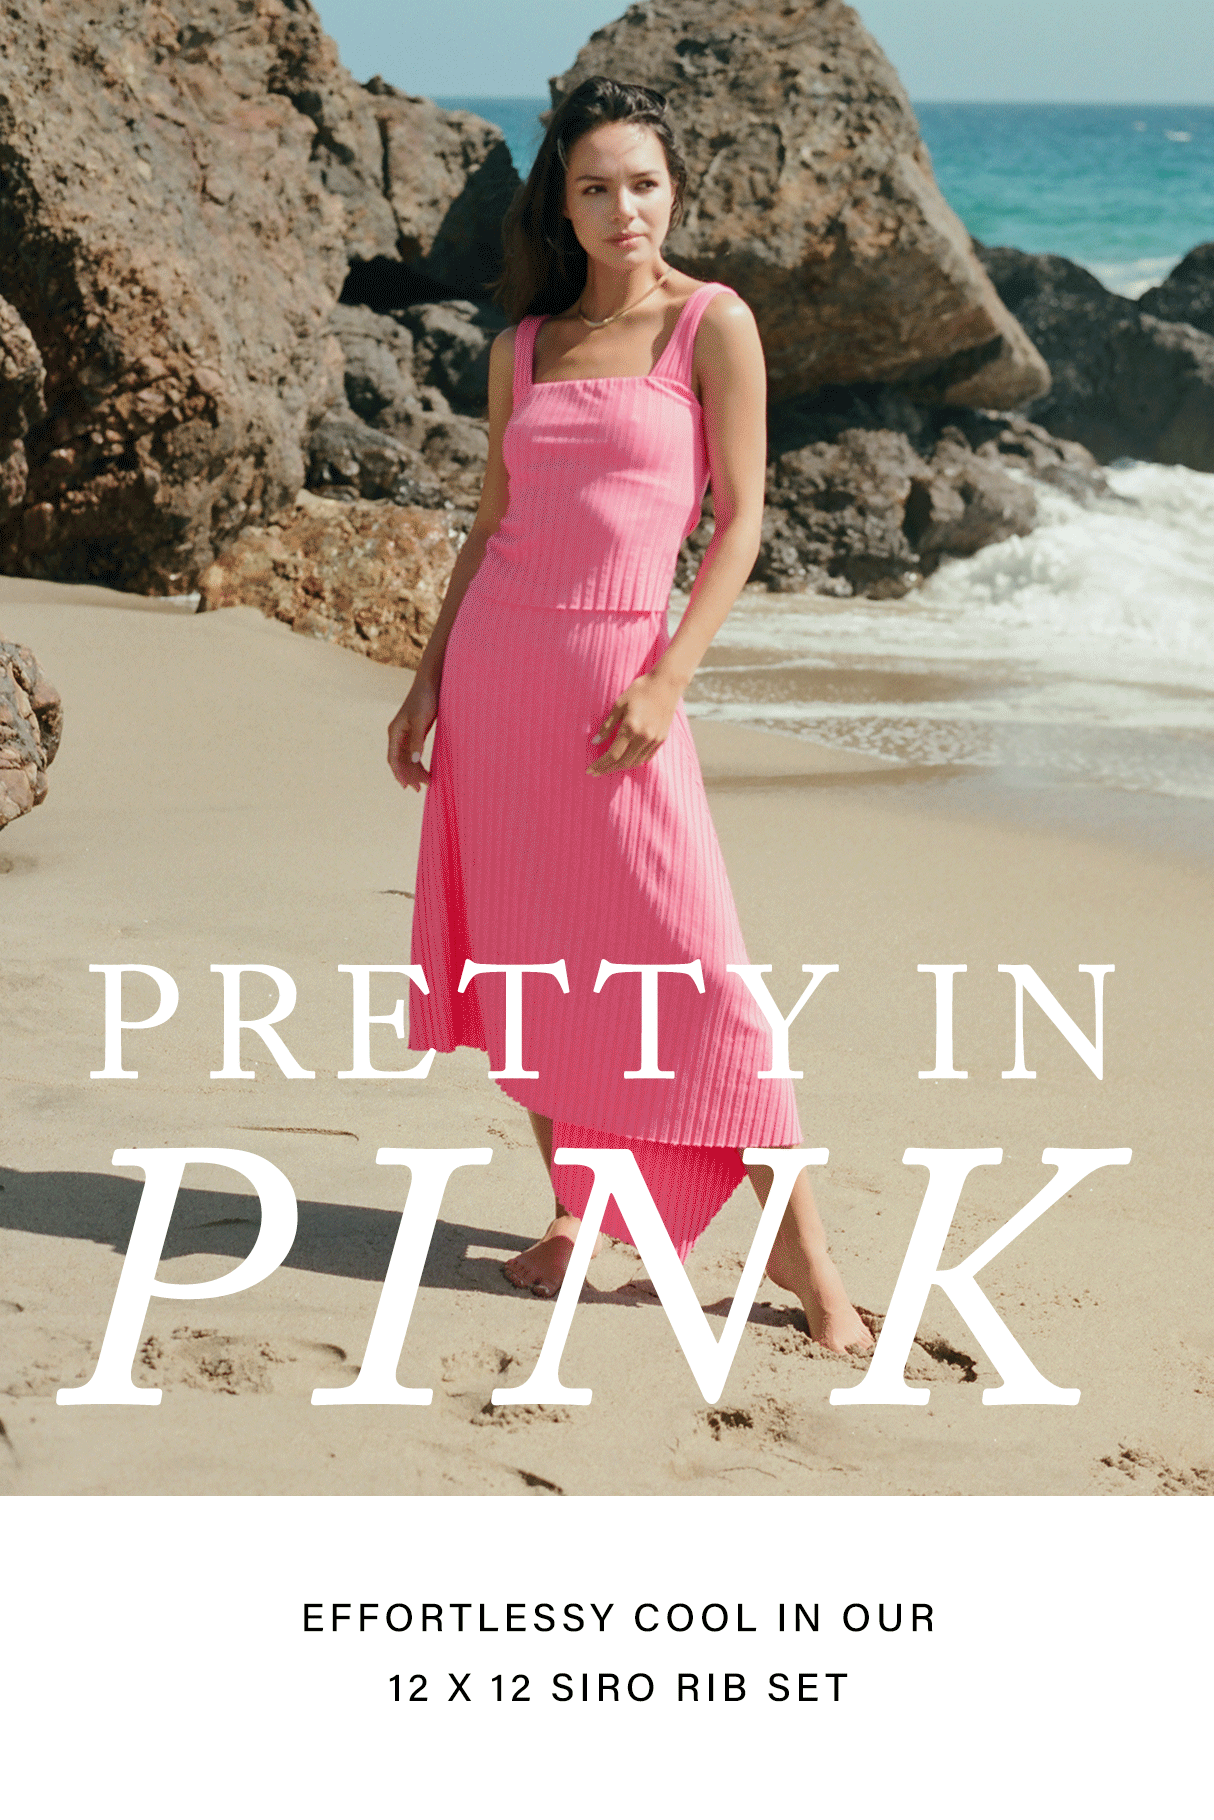 pretty in pink. effortlessly cool in our 12 x 12 siro rib set